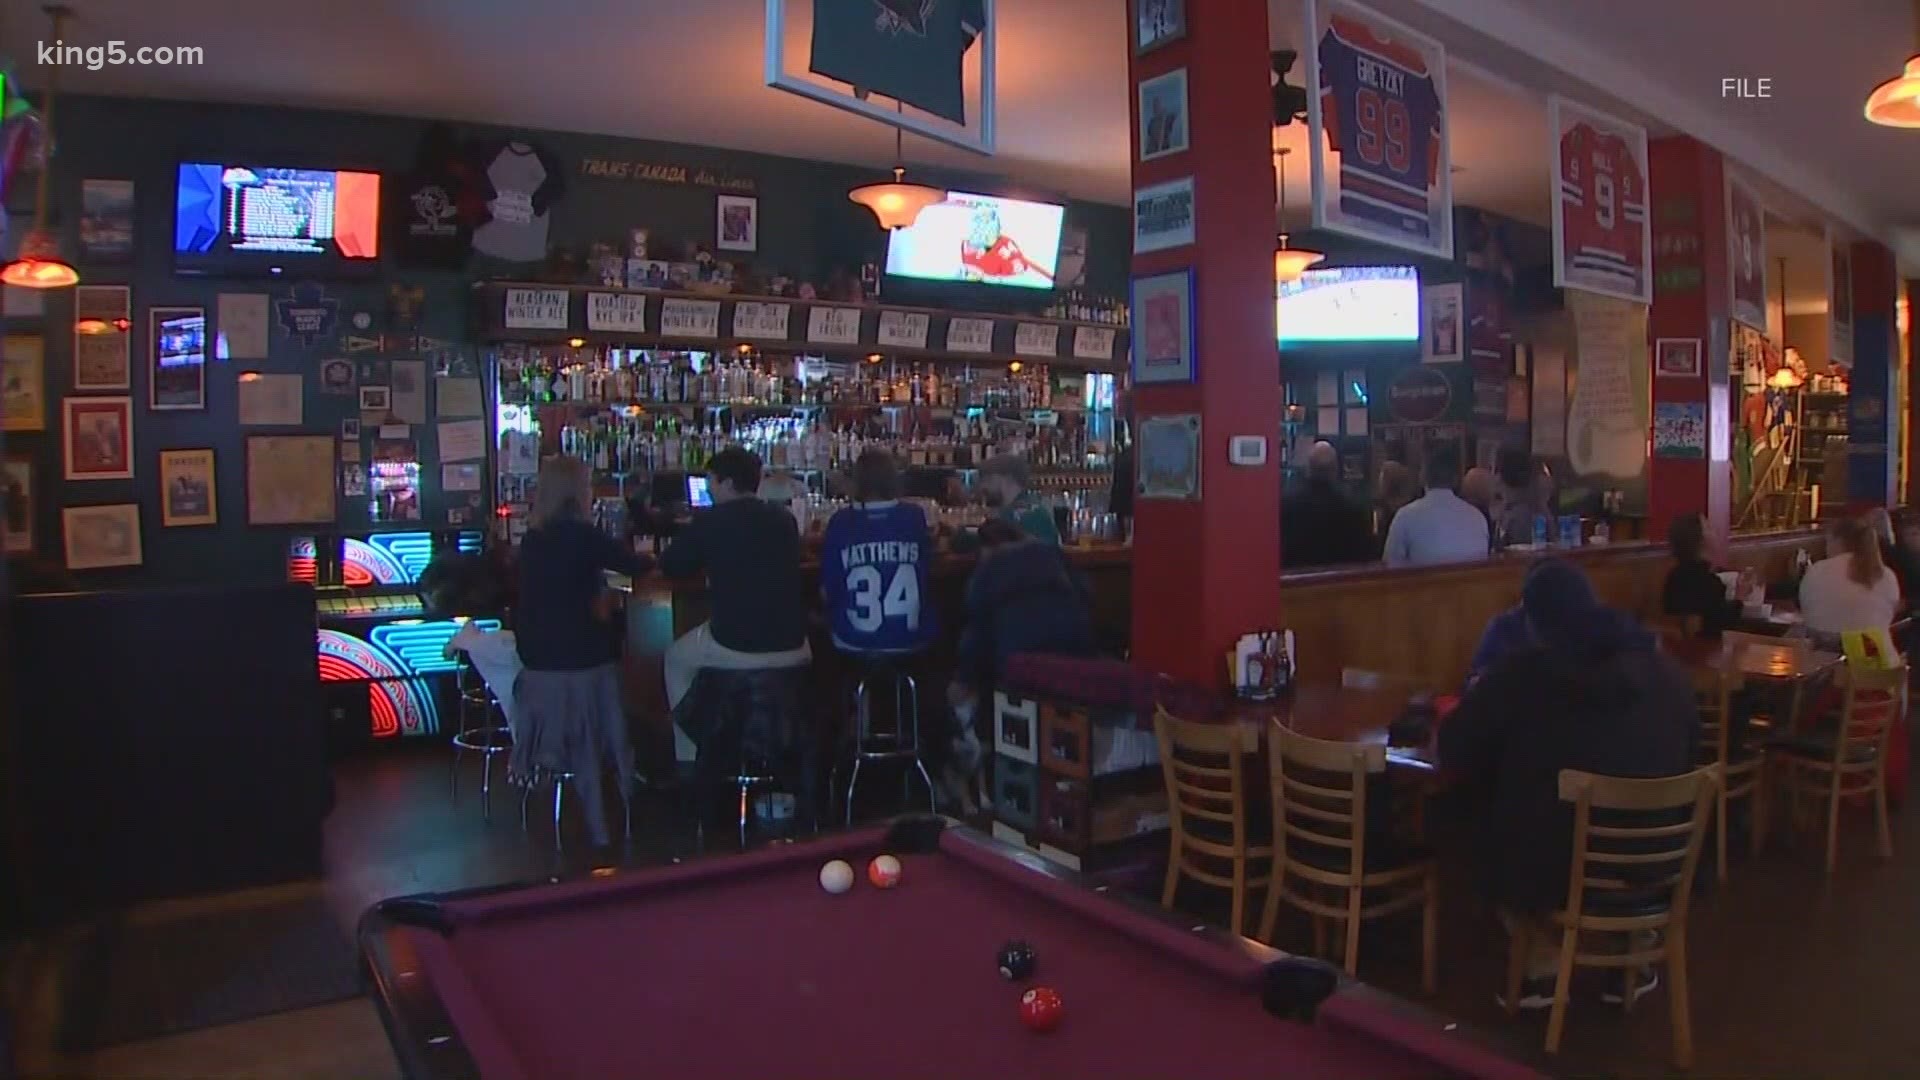 Seattle's only hockey bar in the Greenwood neighborhood is closed due to the pandemic, but they hope to bounce back before the Seattle Kraken start playing.